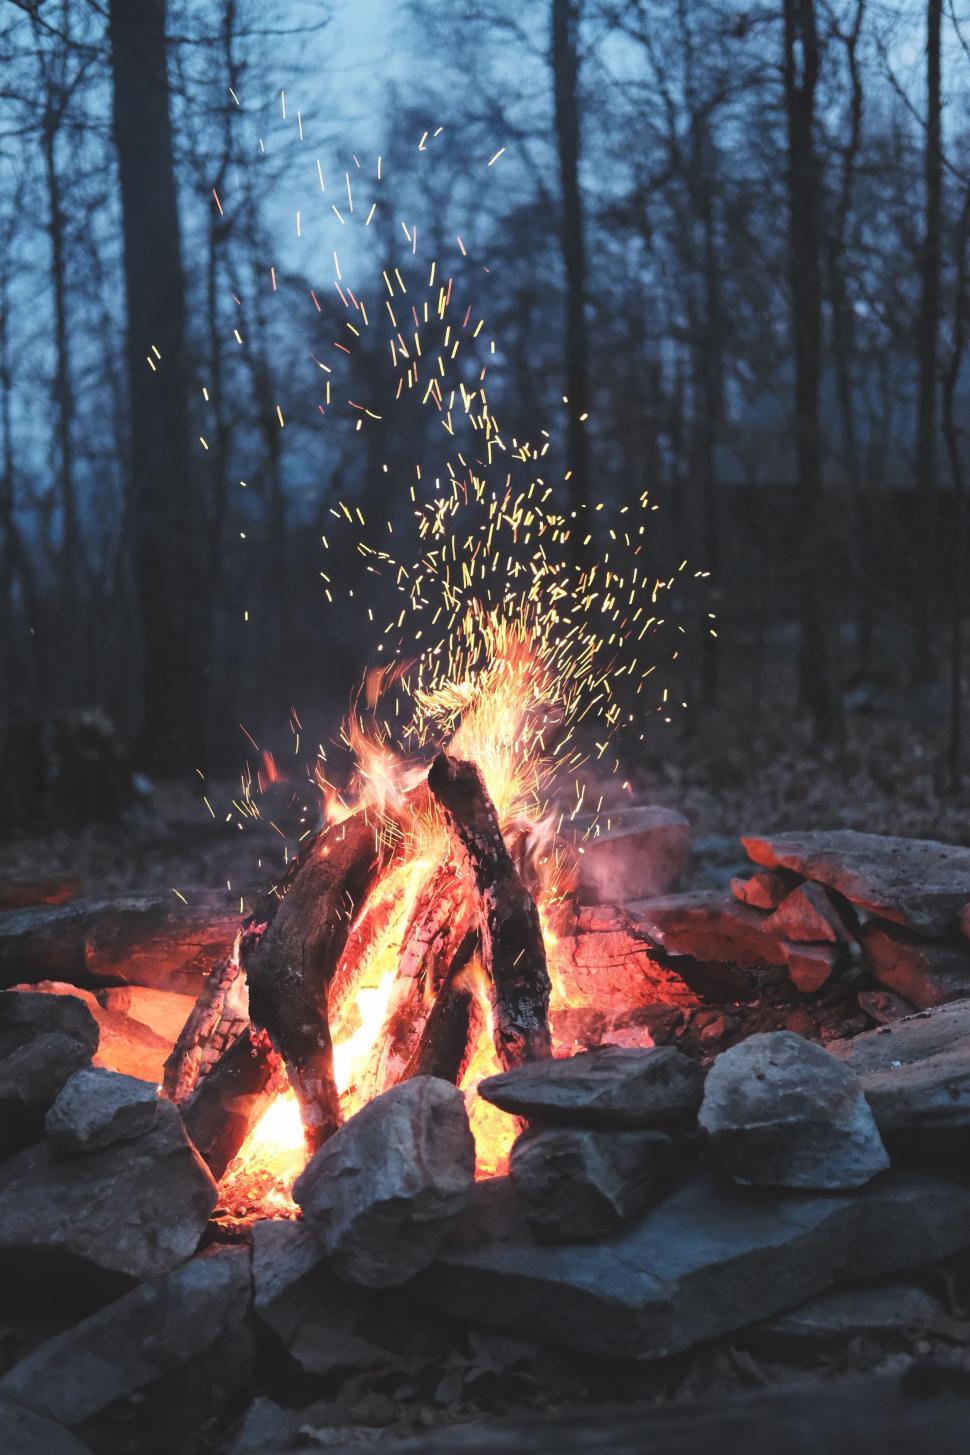 Free Image of Campfire Burning Brightly in Forest Clearing 